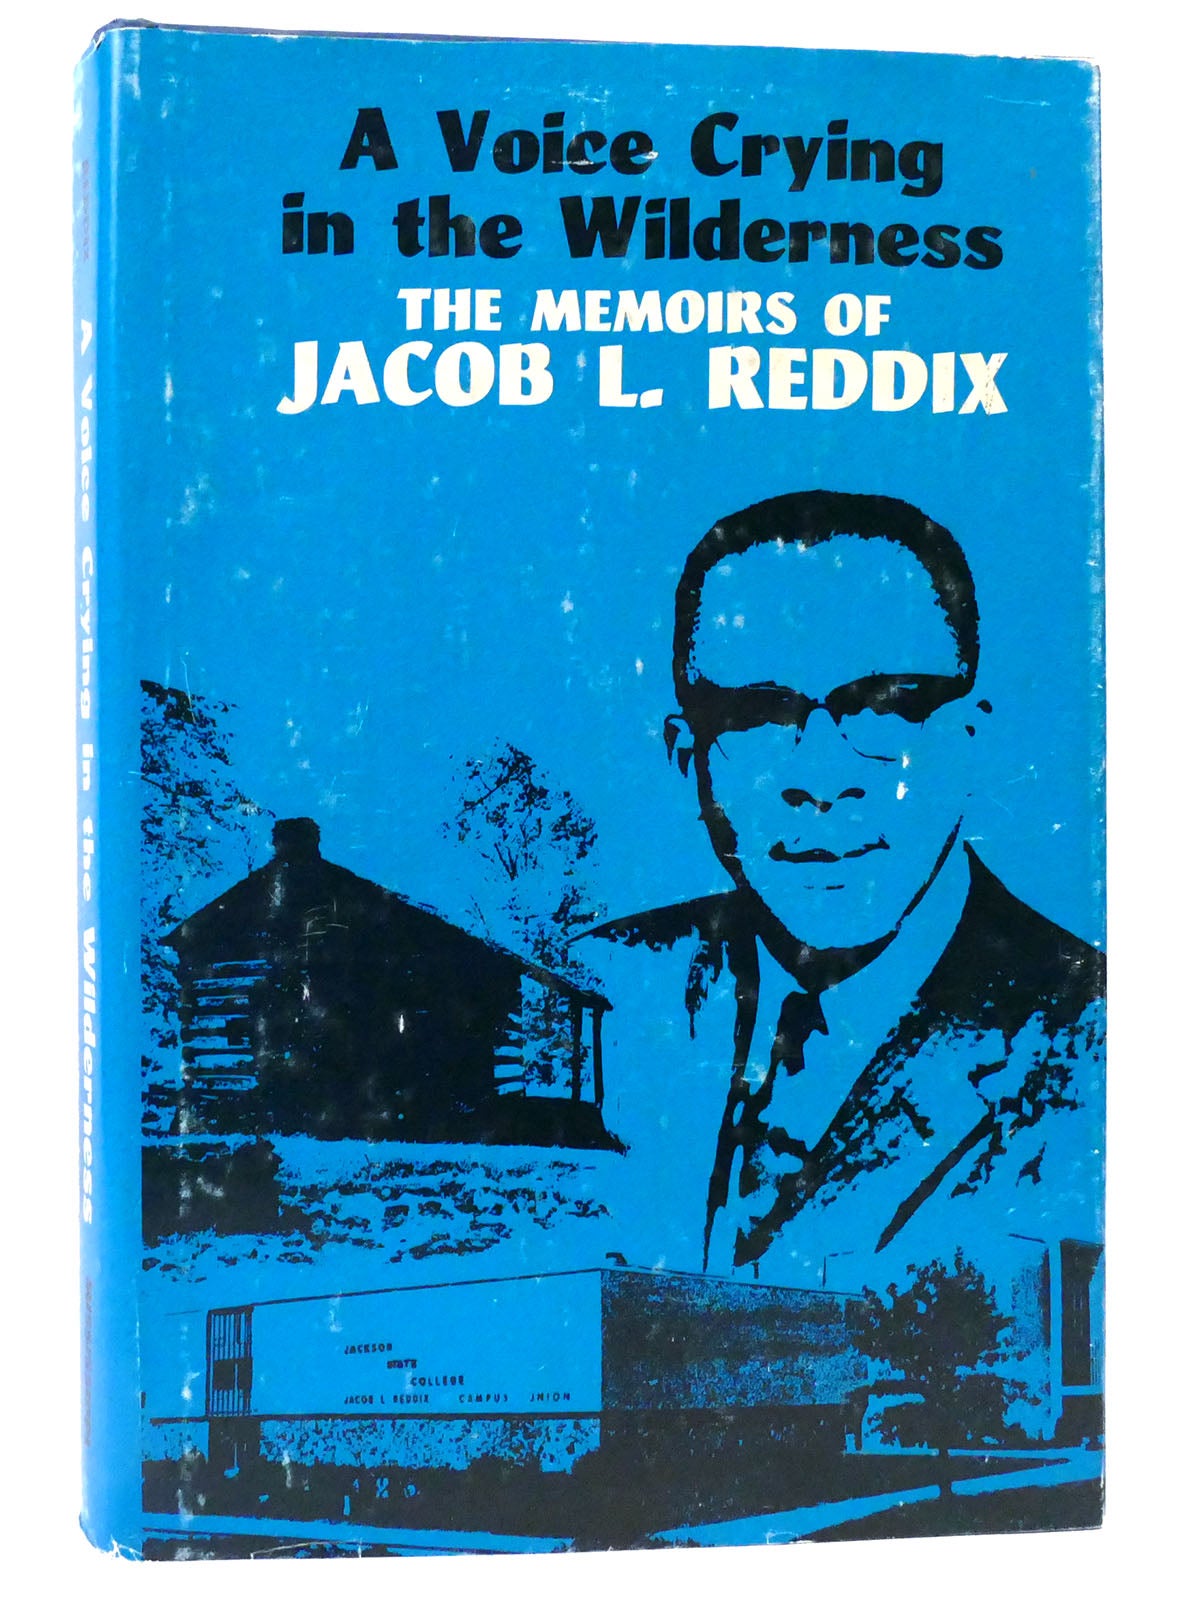 A VOICE CRYING IN THE WILDERNESS: THE MEMOIRS OF JACOB L. REDDIX. Jacob L. Reddix.